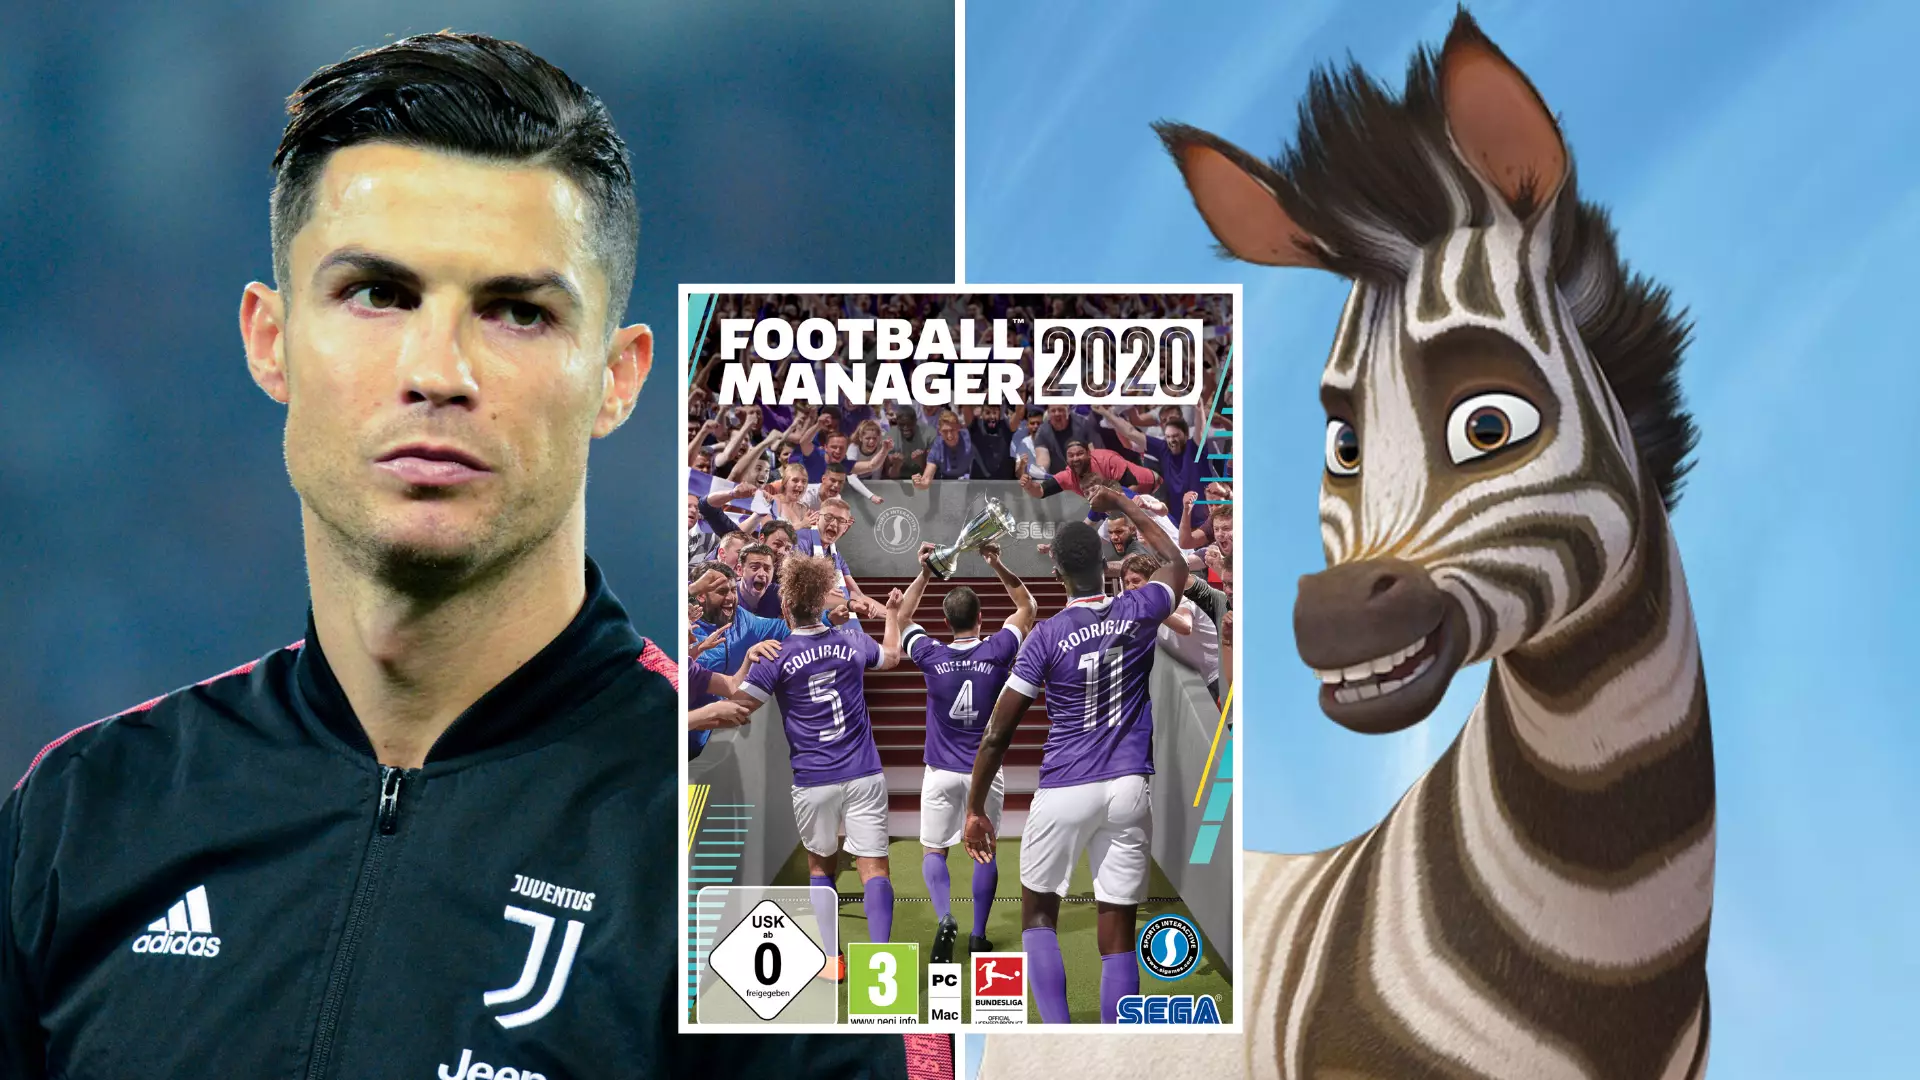 Juventus Licence Won't Feature In Football Manager 2020 After Konami's Exclusive Partnership